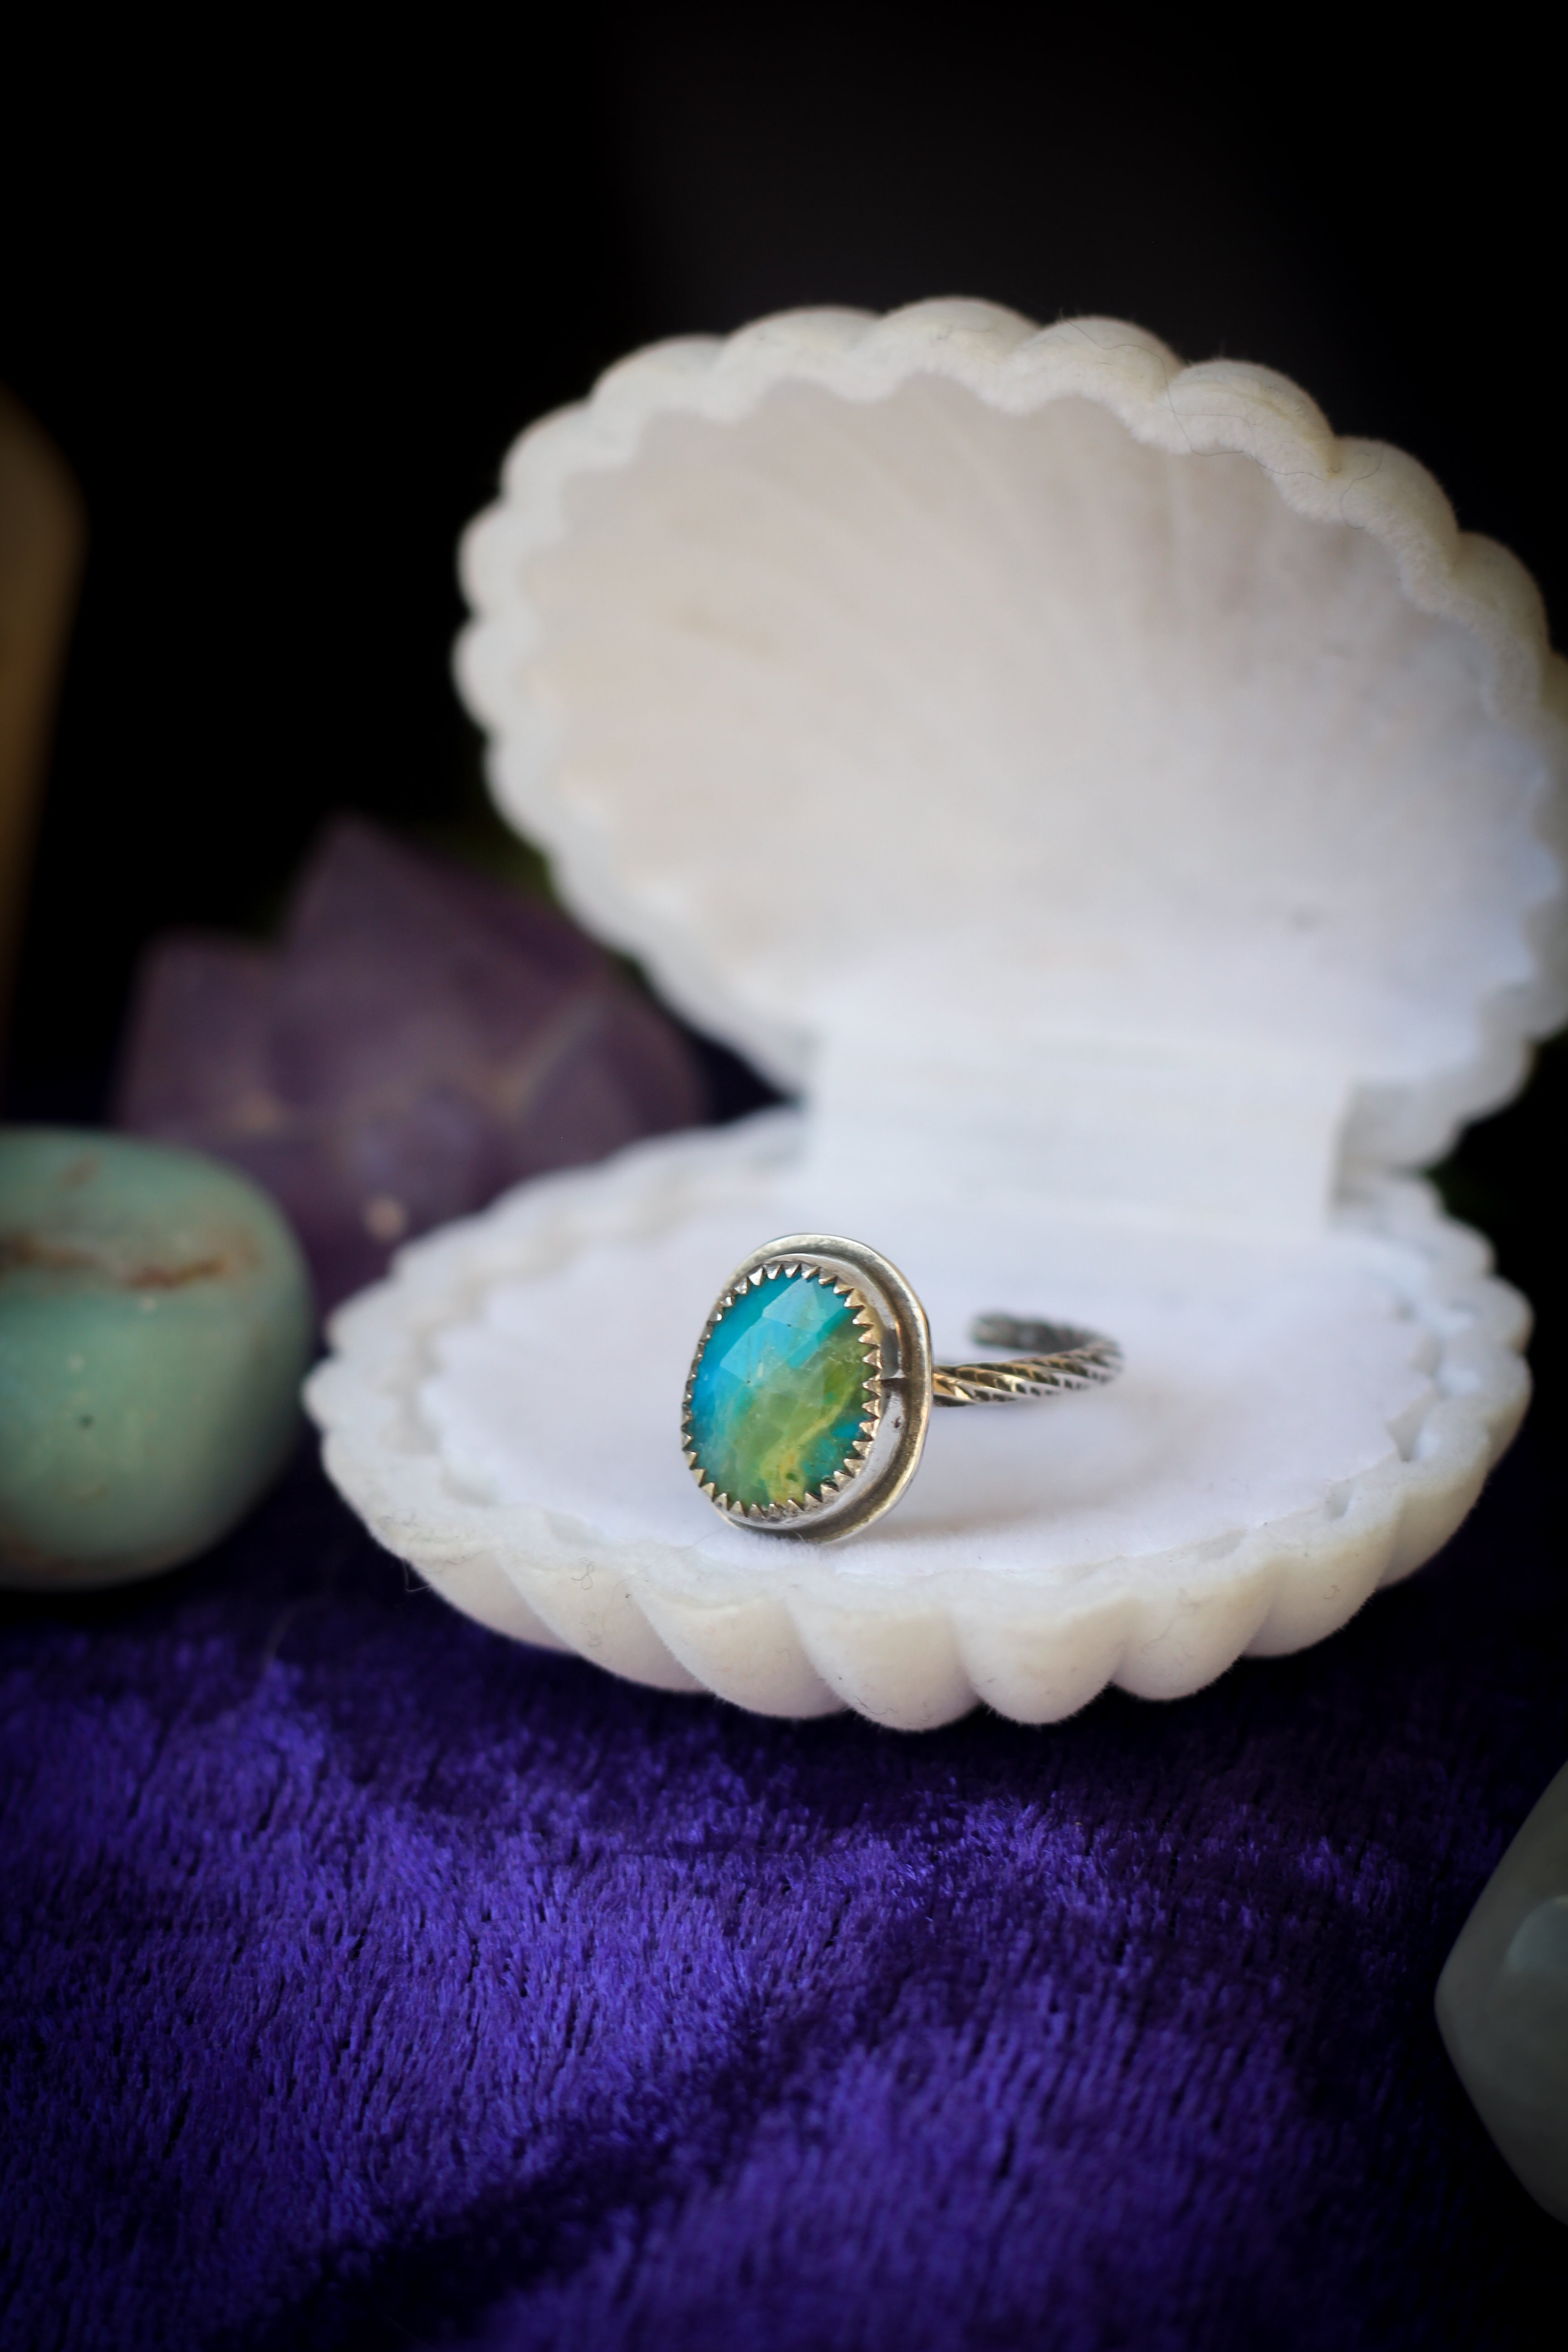 Les Atlantes - Peruvian opal ring with chrysocolla inclusions, silver